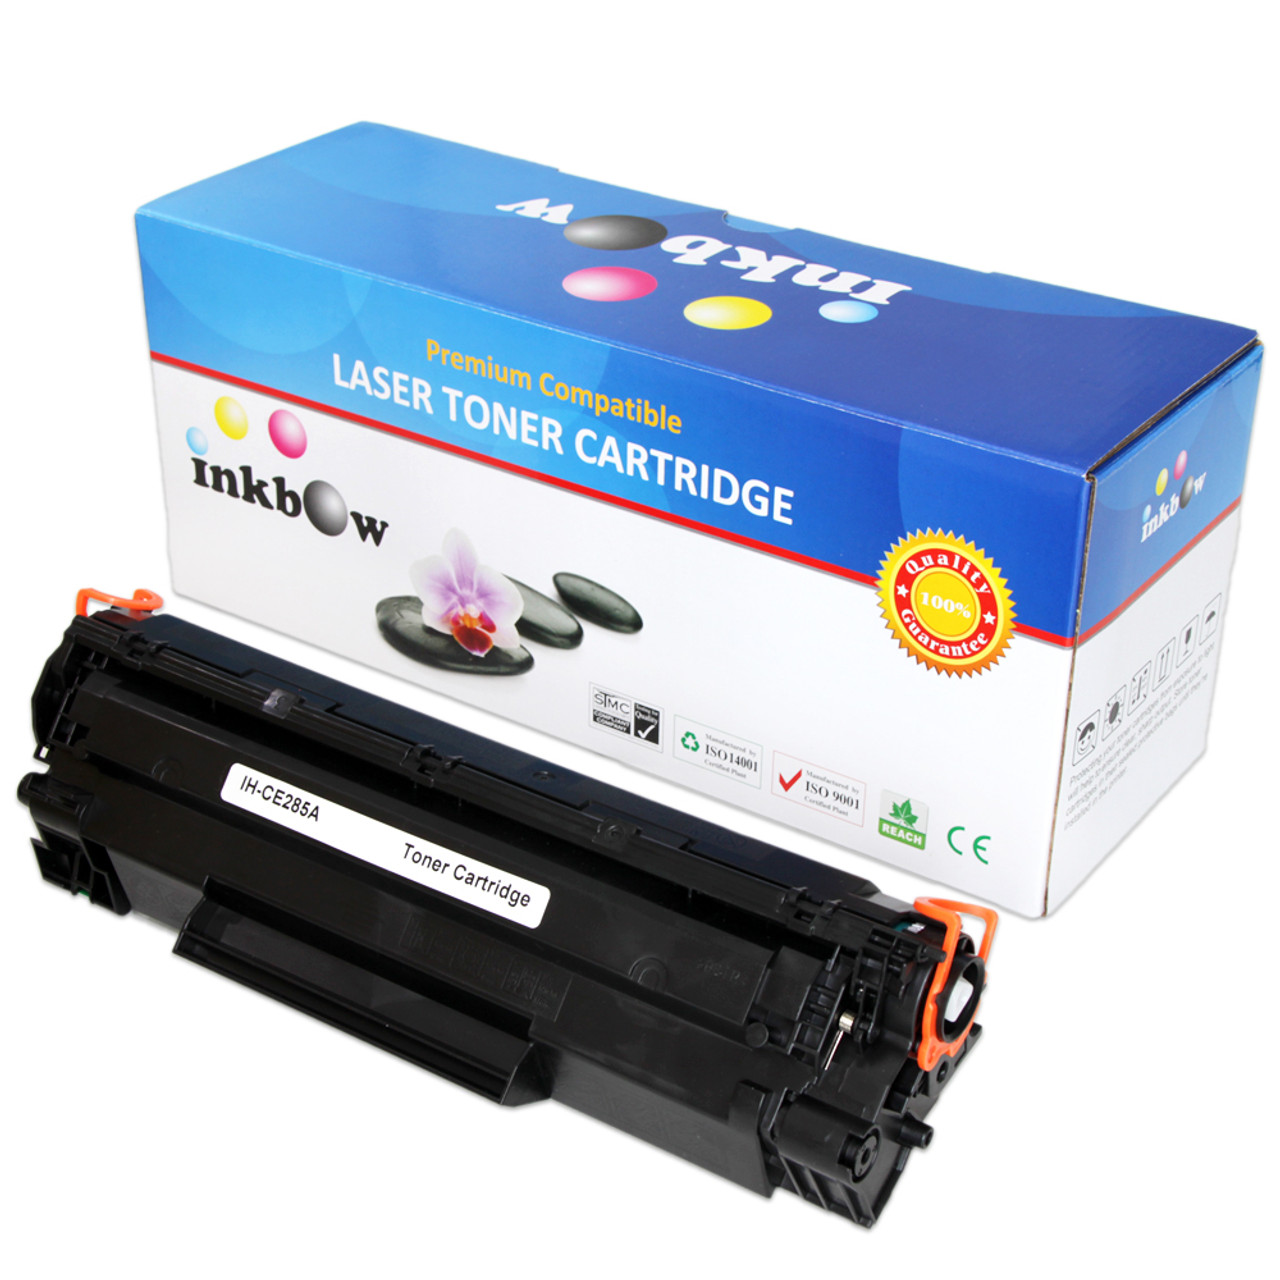 Compatible HP 85A Black Laser Toner Cartridge | CE285A Price in Singapore |  Cheapest HP 85A Toner